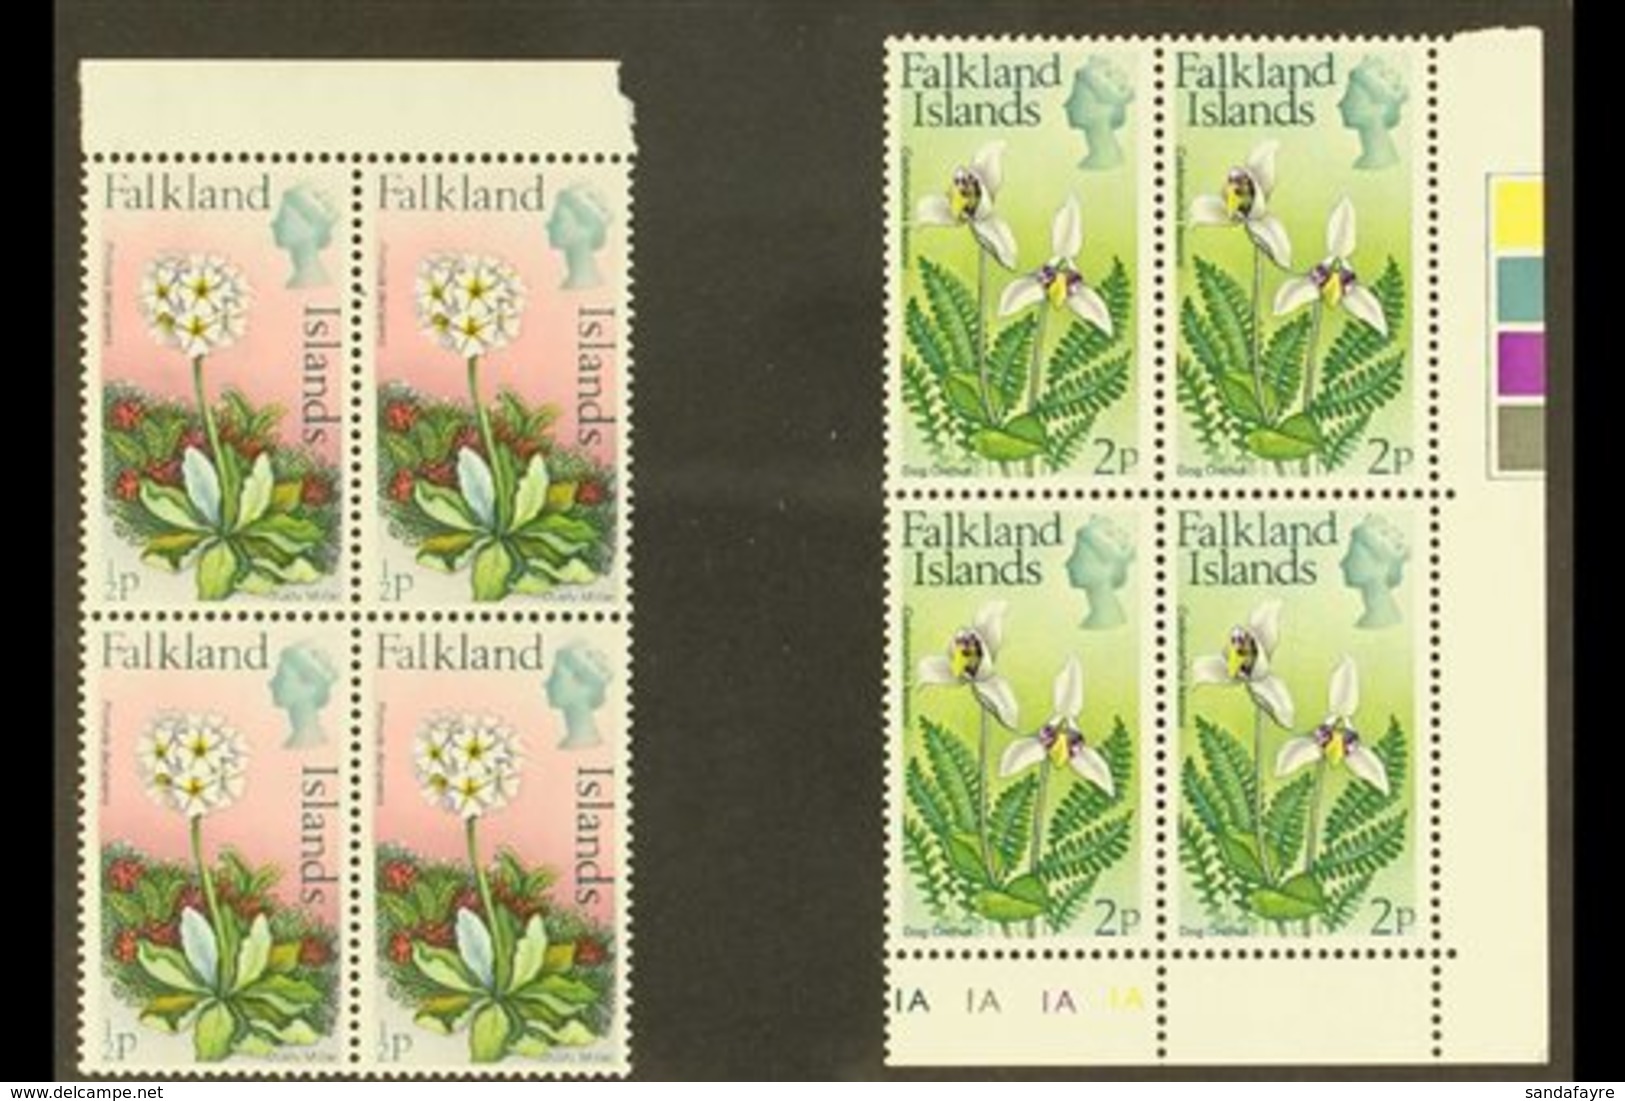 1974  Flowers Definitive ½d And 2d With Watermark Upright, SG 293/94, Never Hinged Mint Marginal BLOCKS OF FOUR. (2 Bloc - Islas Malvinas